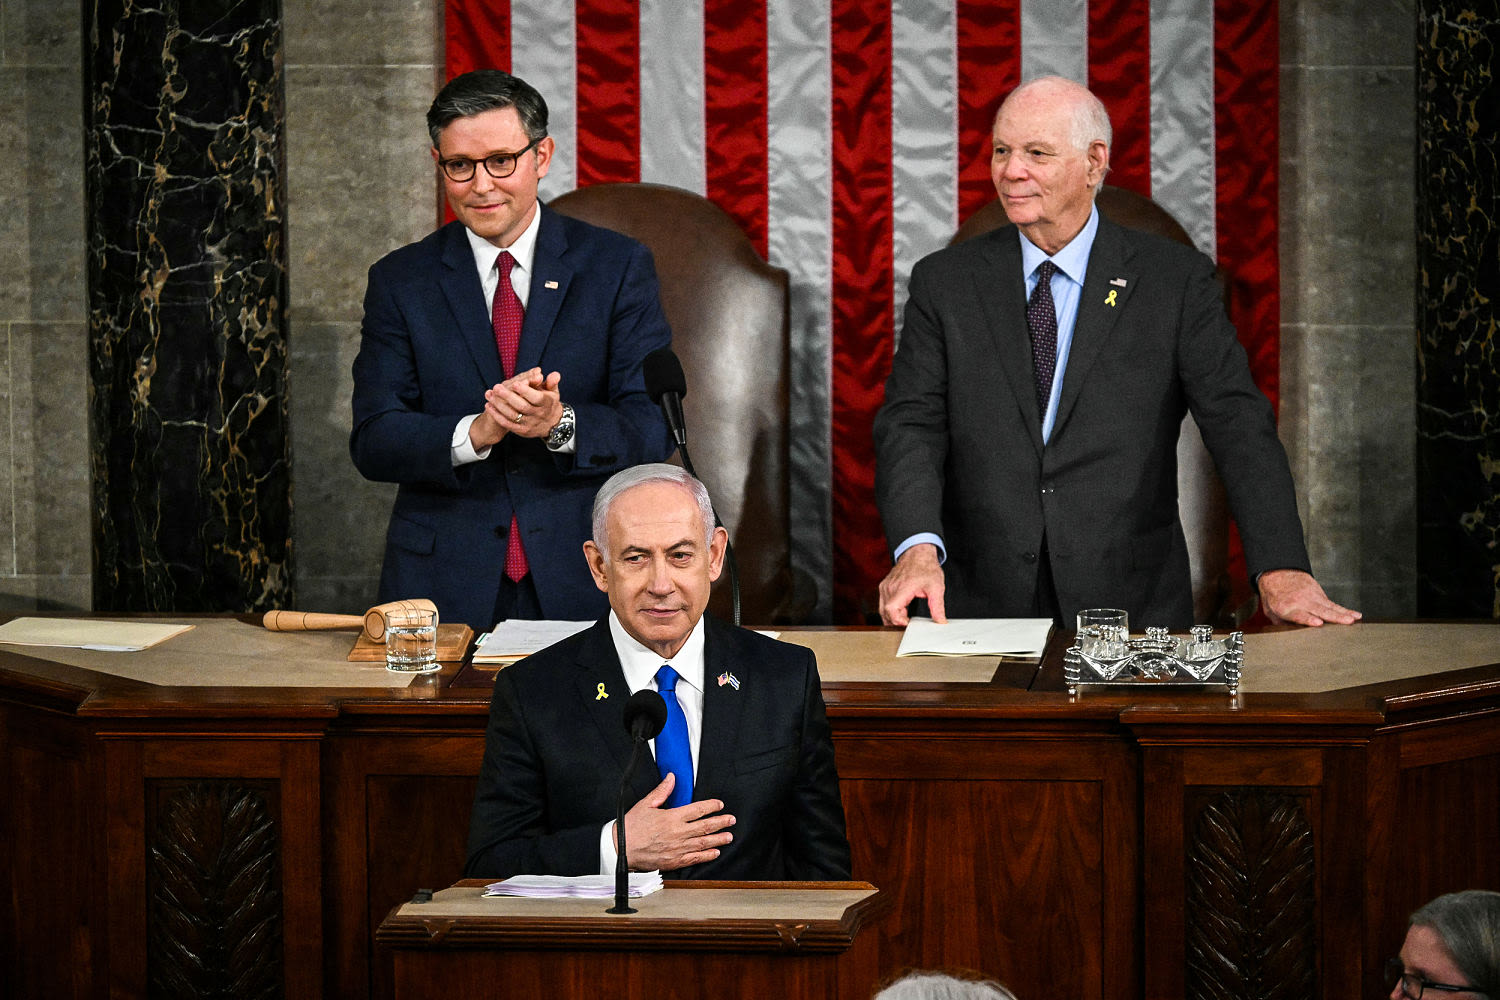 Netanyahu compares Oct. 7 to Pearl Harbor and criticizes protesters in address to Congress